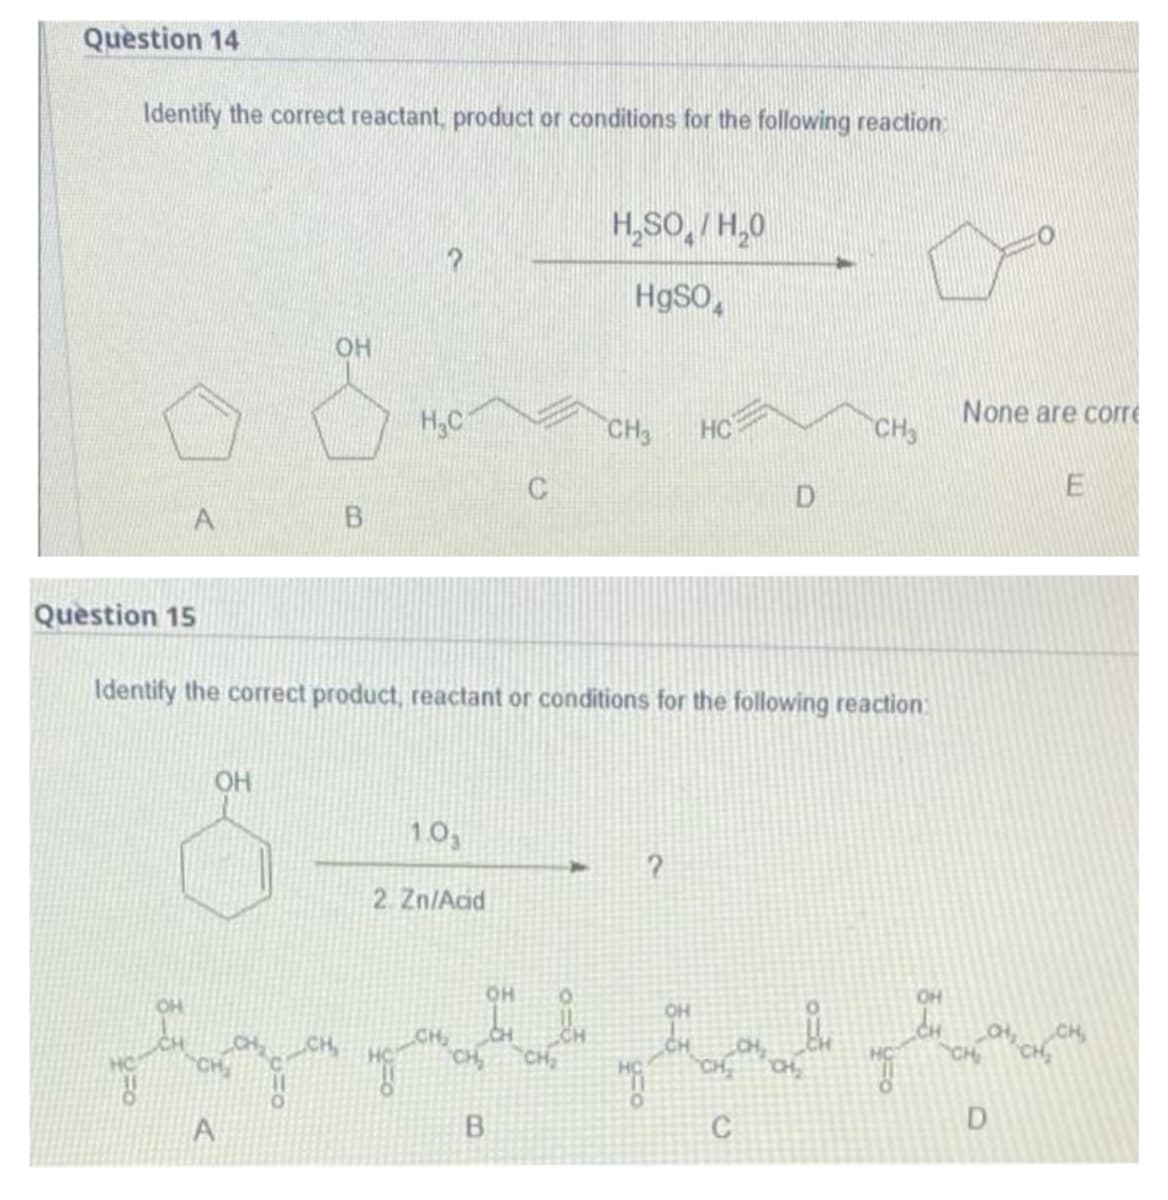 Question 14
Identify the correct reactant, product or conditions for the following reaction
H₂SO/H₂0
?
HgSO
OH
H₂C
CH3
D
Question 15
Identify the correct product, reactant or conditions for the following reaction:
OH
1.0₁
?
2. Zn/Acid
OH
CH₂
ht
CH
CH₂
CH CH₂
A
C
0-8
A
OH
CH₂ CH₂
B
8.
"f
HC
CH3
ہیے
None are corre
E
CH
D